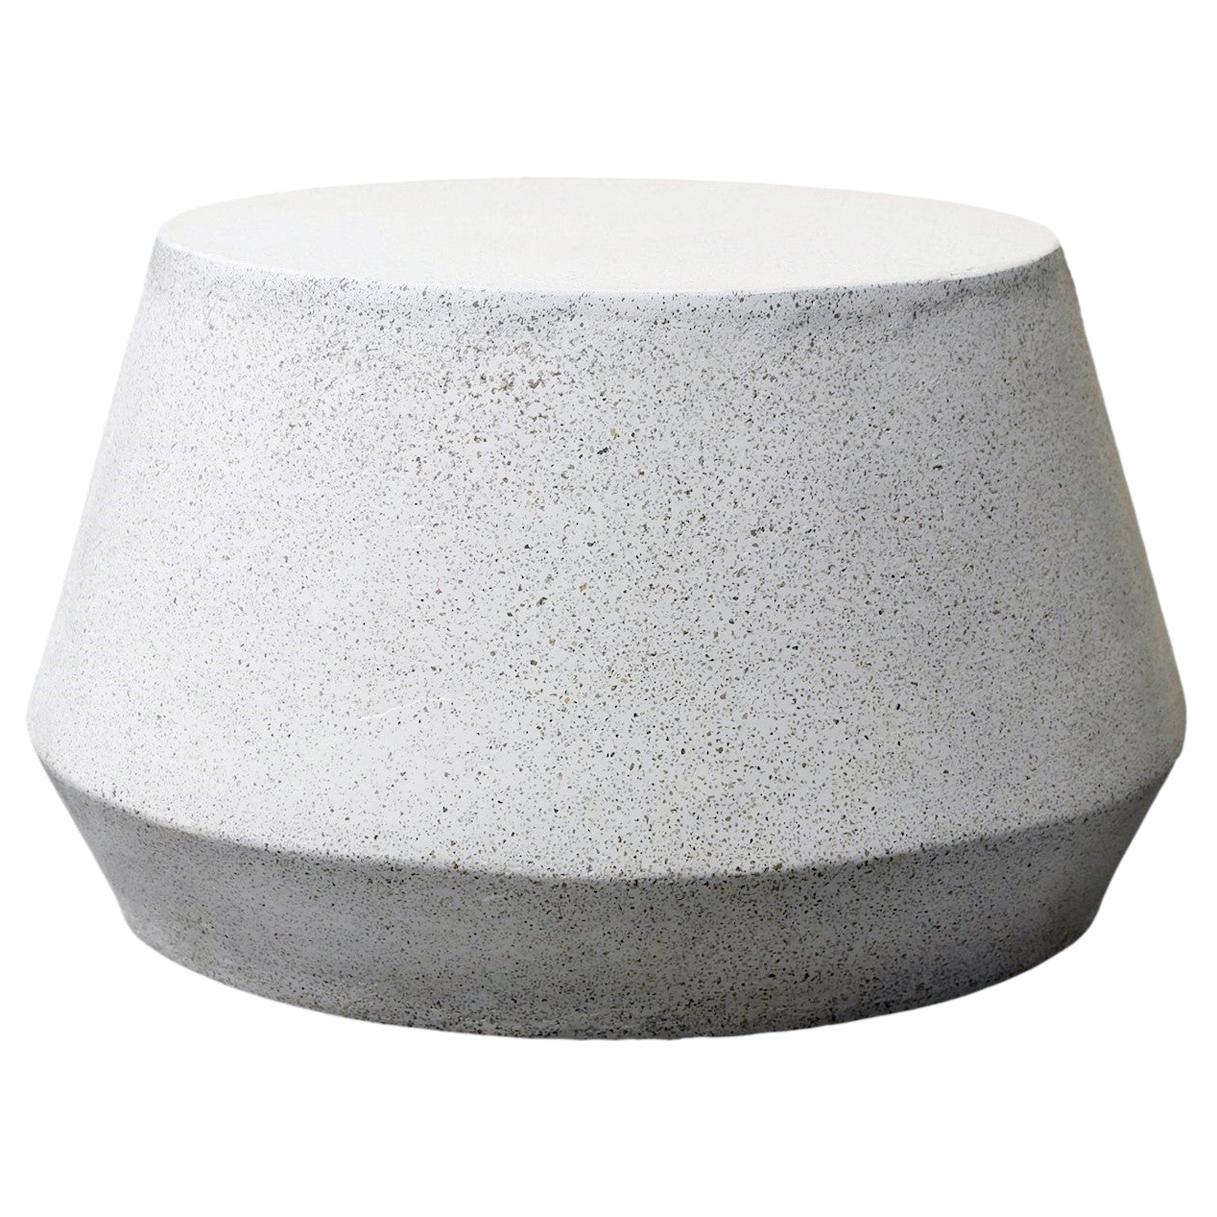 Cast Resin 'Tom' Low Table, Natural Stone Finish by Zachary A. Design